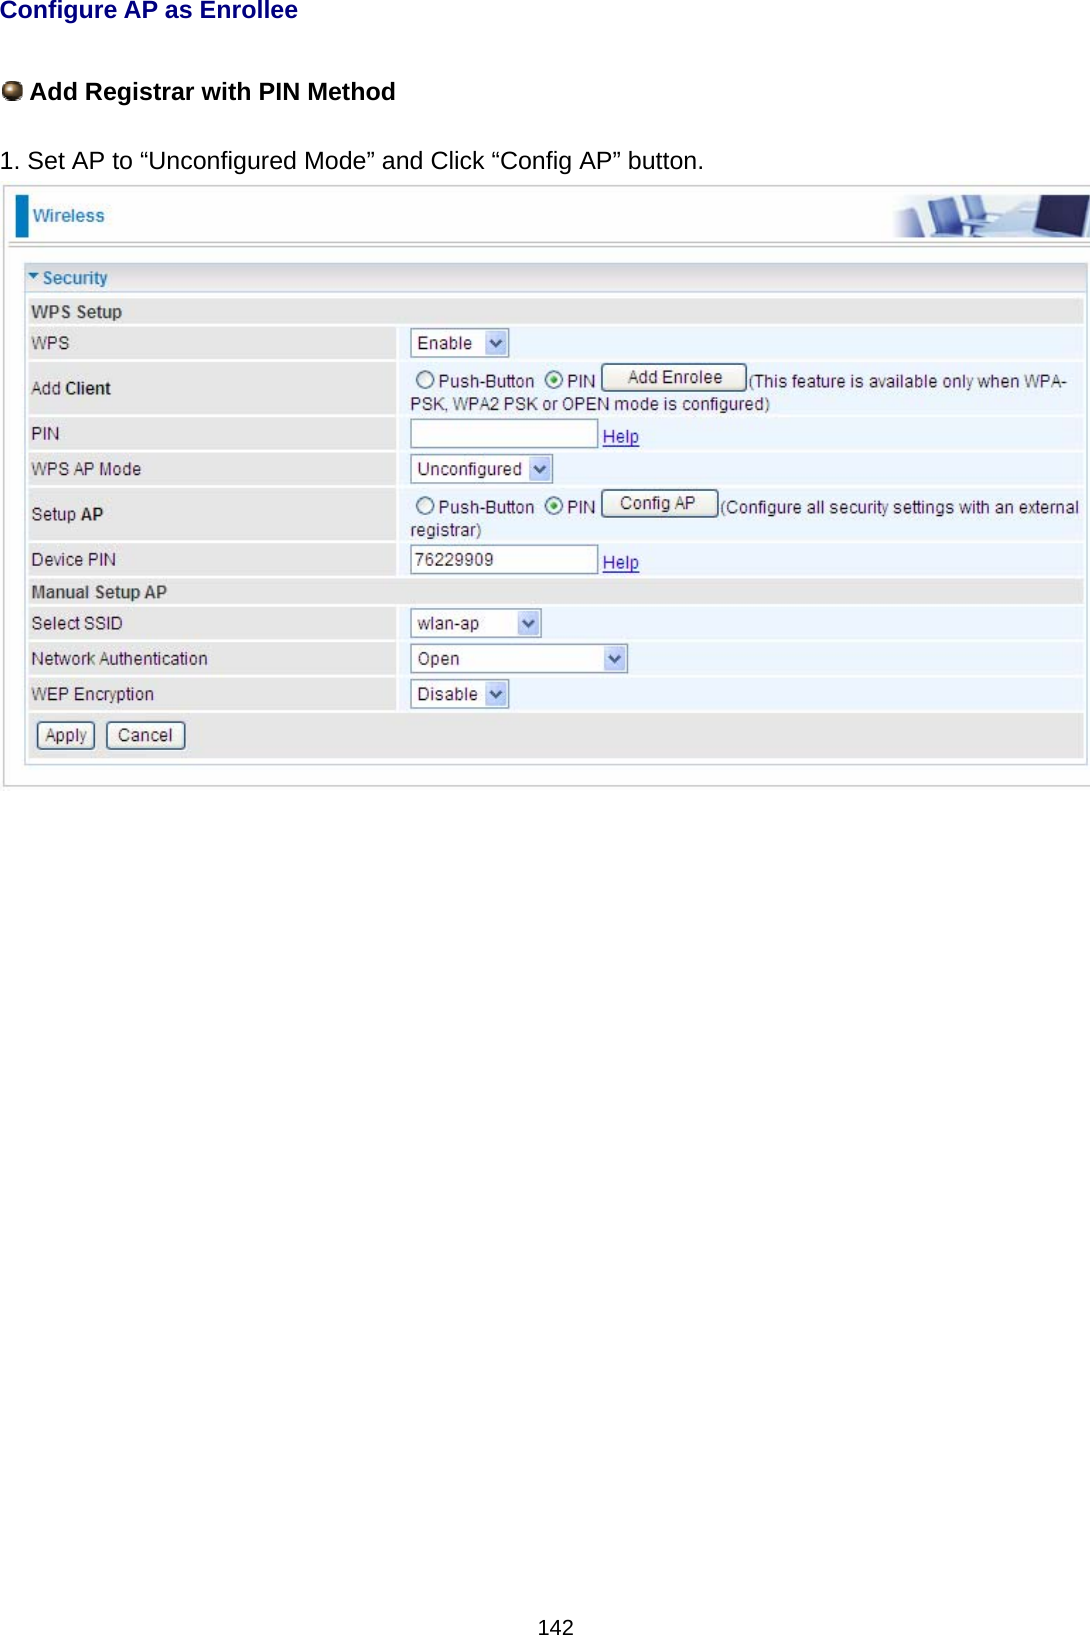  142 Configure AP as Enrollee   Add Registrar with PIN Method  1. Set AP to “Unconfigured Mode” and Click “Config AP” button.                              